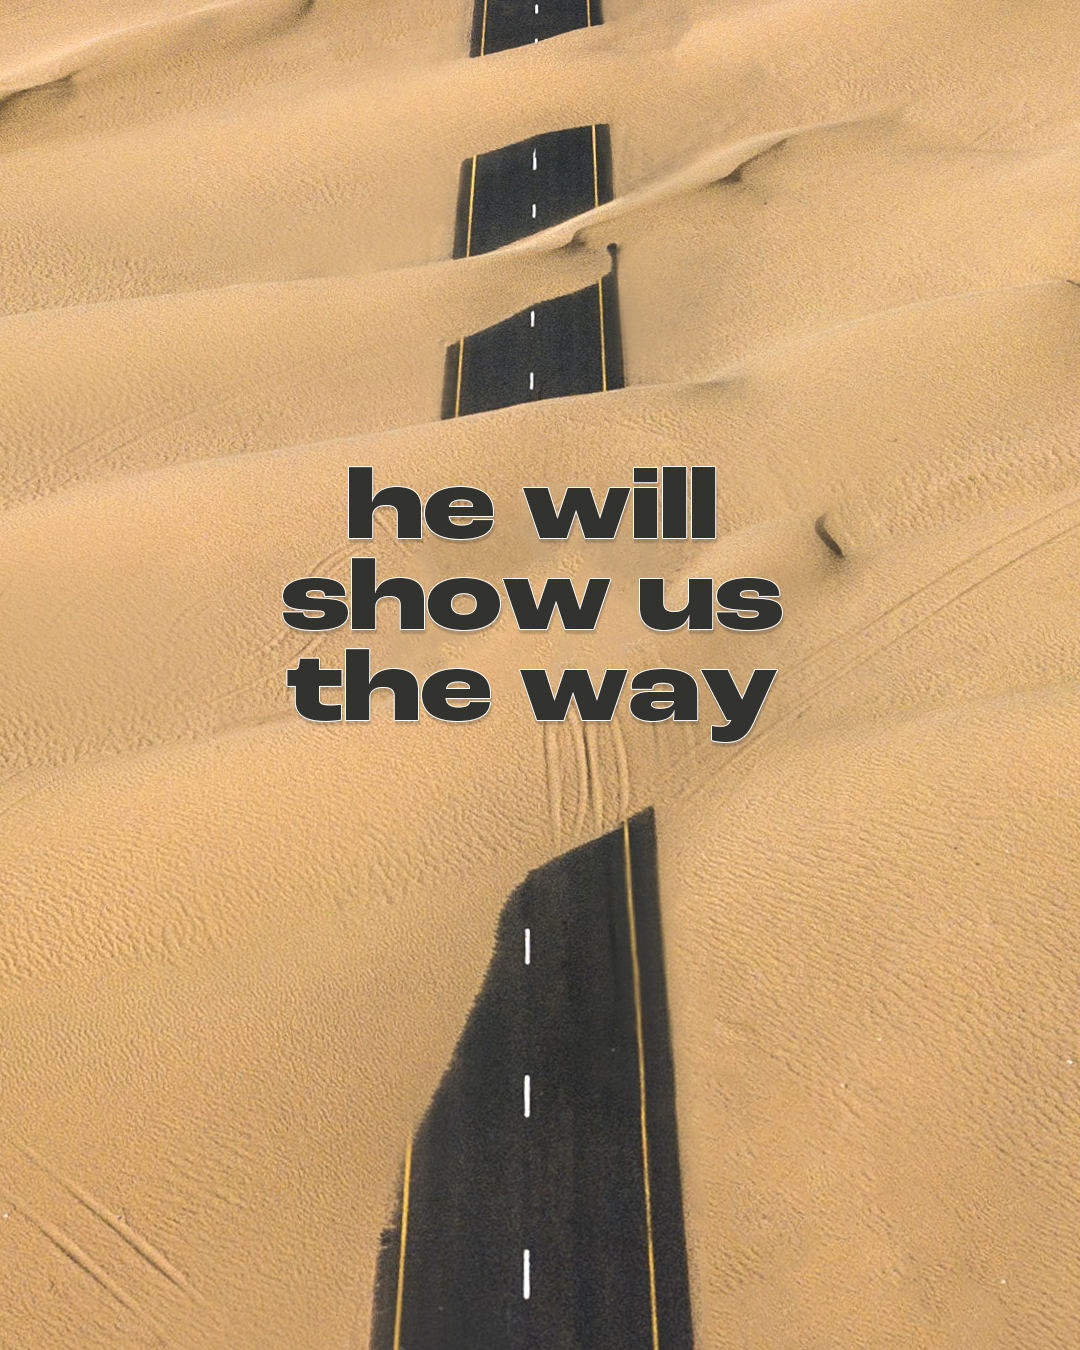 He will show us the way